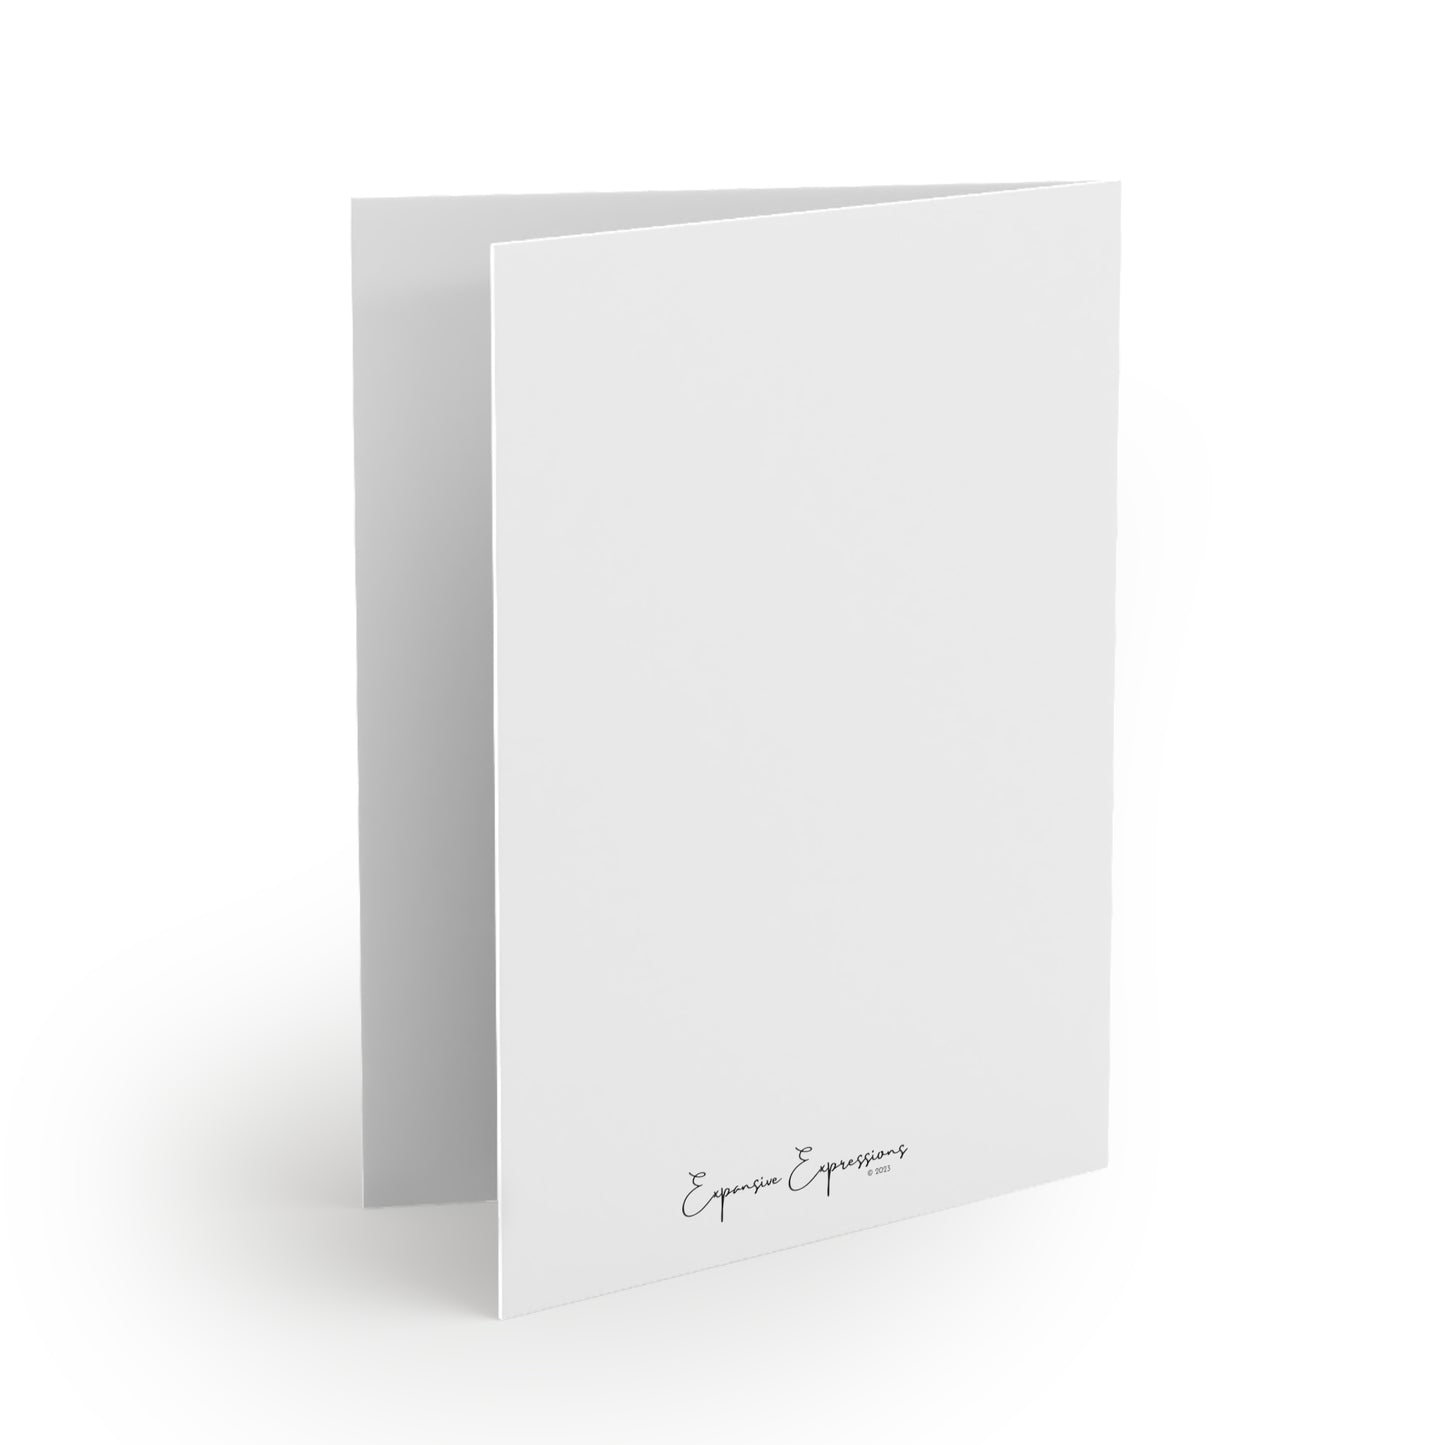 Become Yourself - Greeting cards (8 pack w/ envelopes)